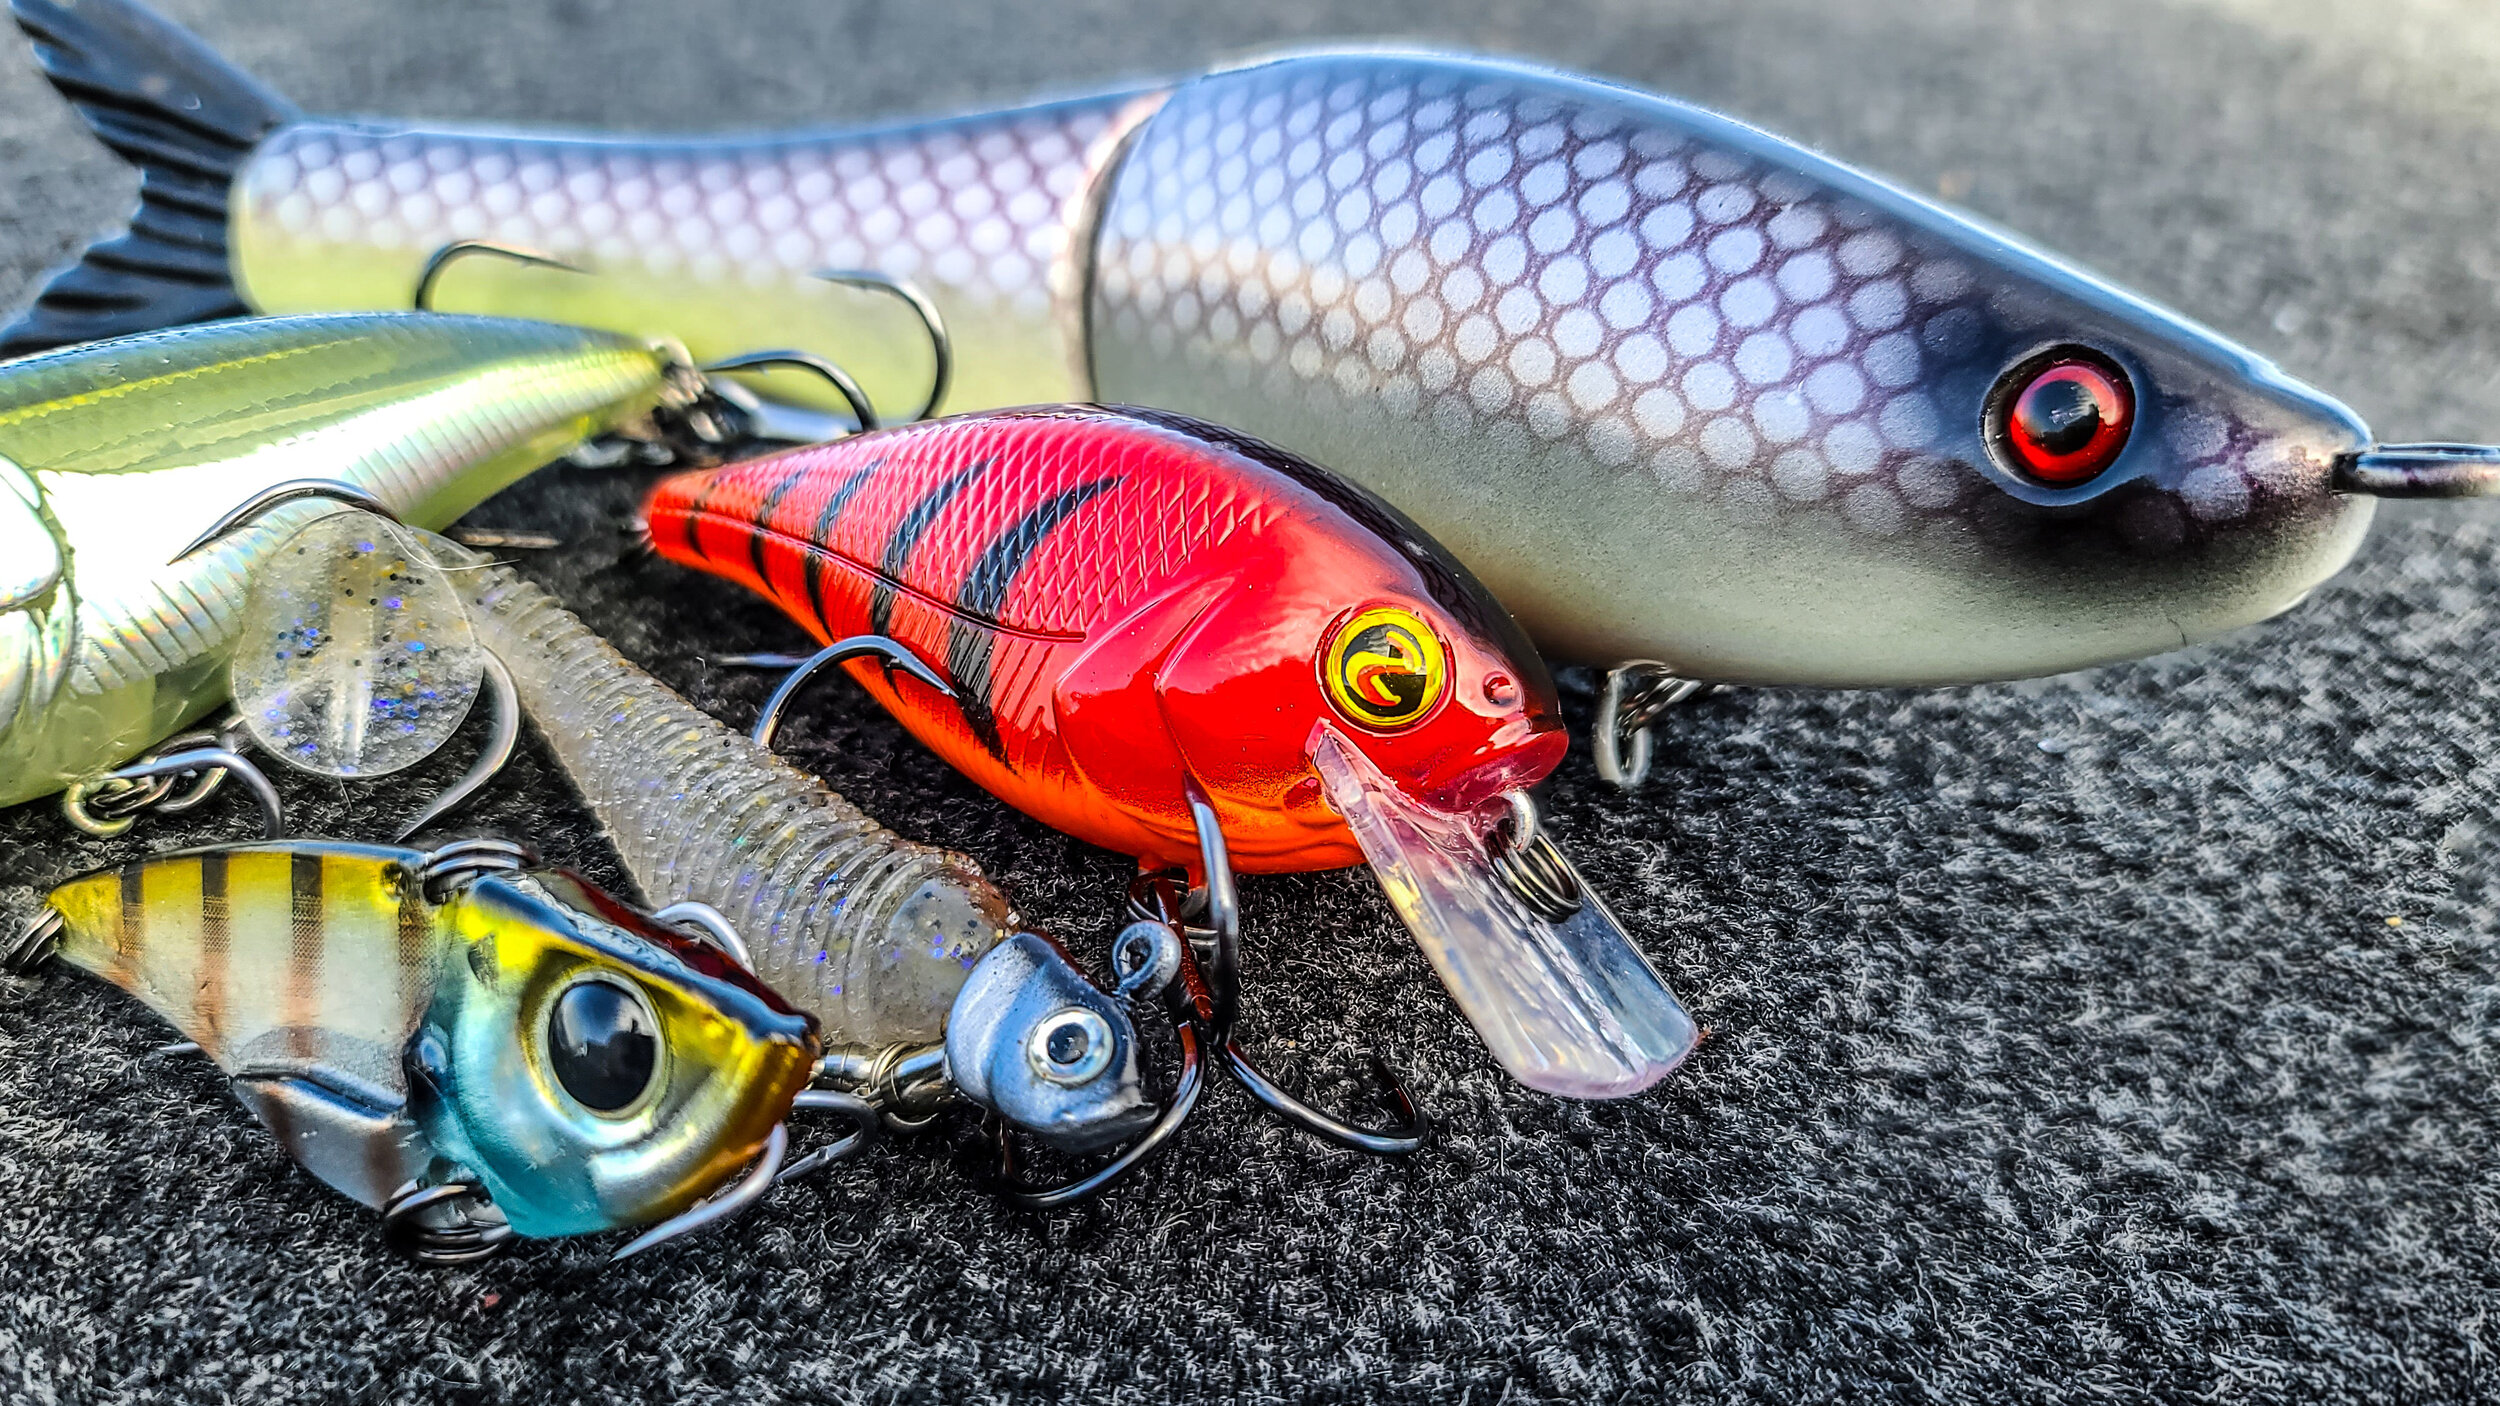 Top 5 Baits For Late Winter Bass Fishing! — Tactical Bassin